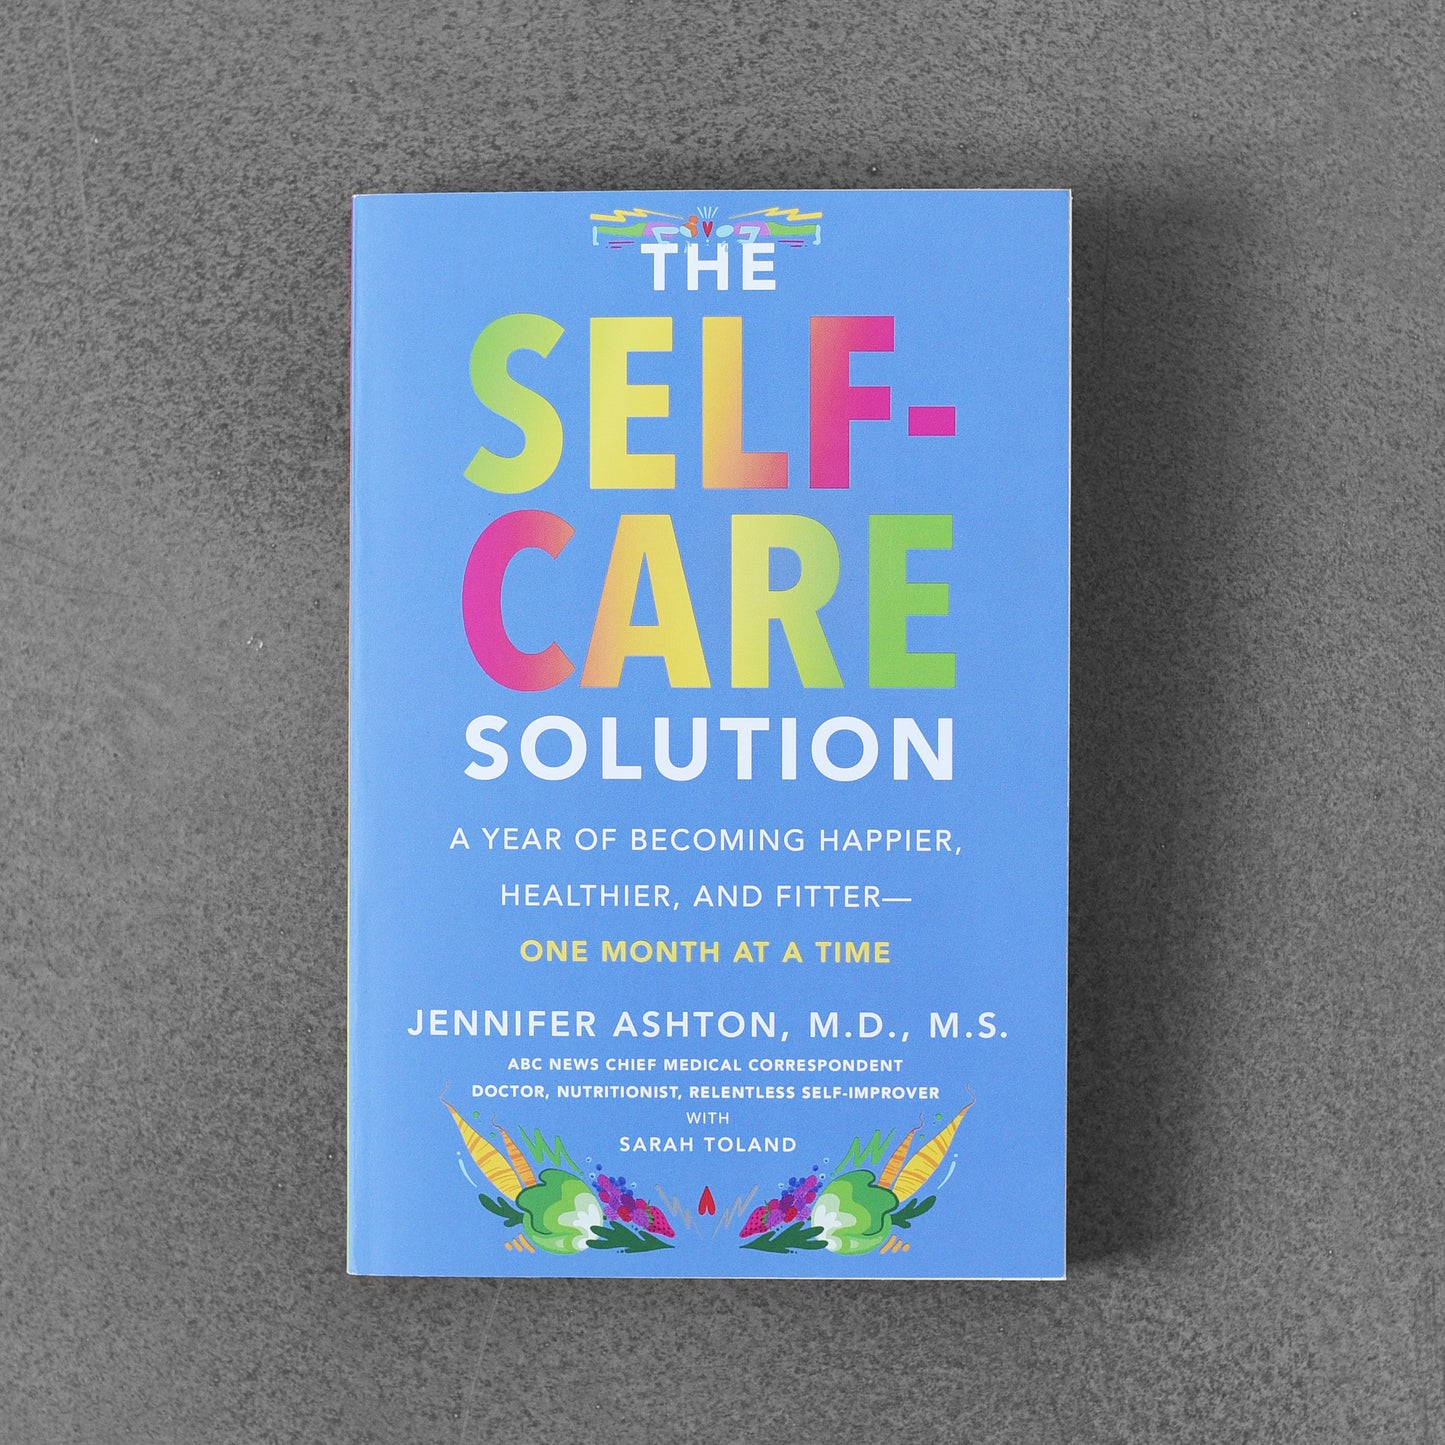 The Self-Care Solution: A Year of Becoming Happier, Healthier, and Fitter